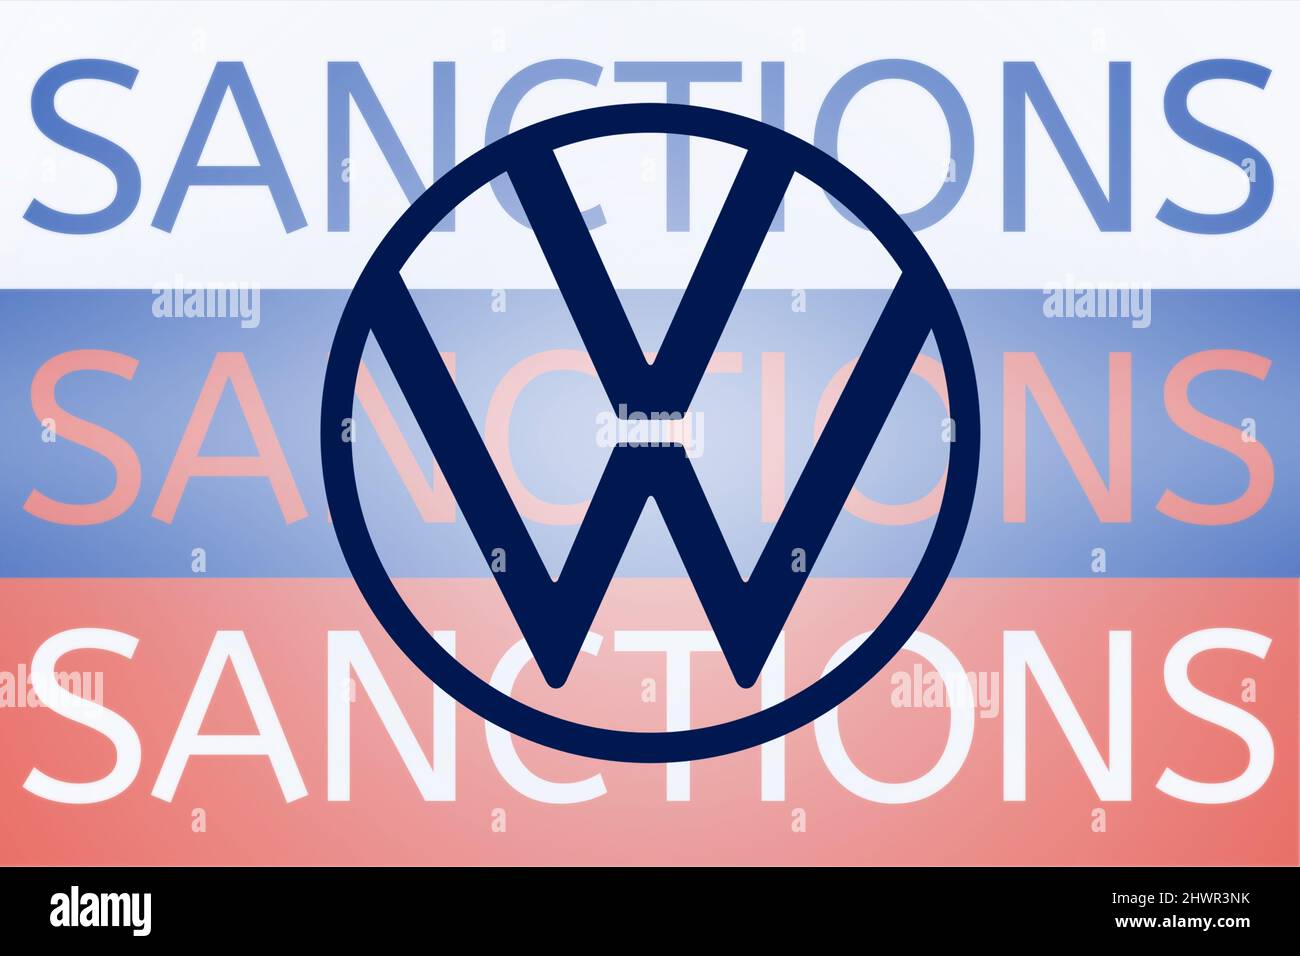 VW Volkswagen logo in front of the sanction text on the Russian flag. Fresh sanctions against Russia over its invasion of Ukraine. March 2022, San Francisco, USA Stock Photo